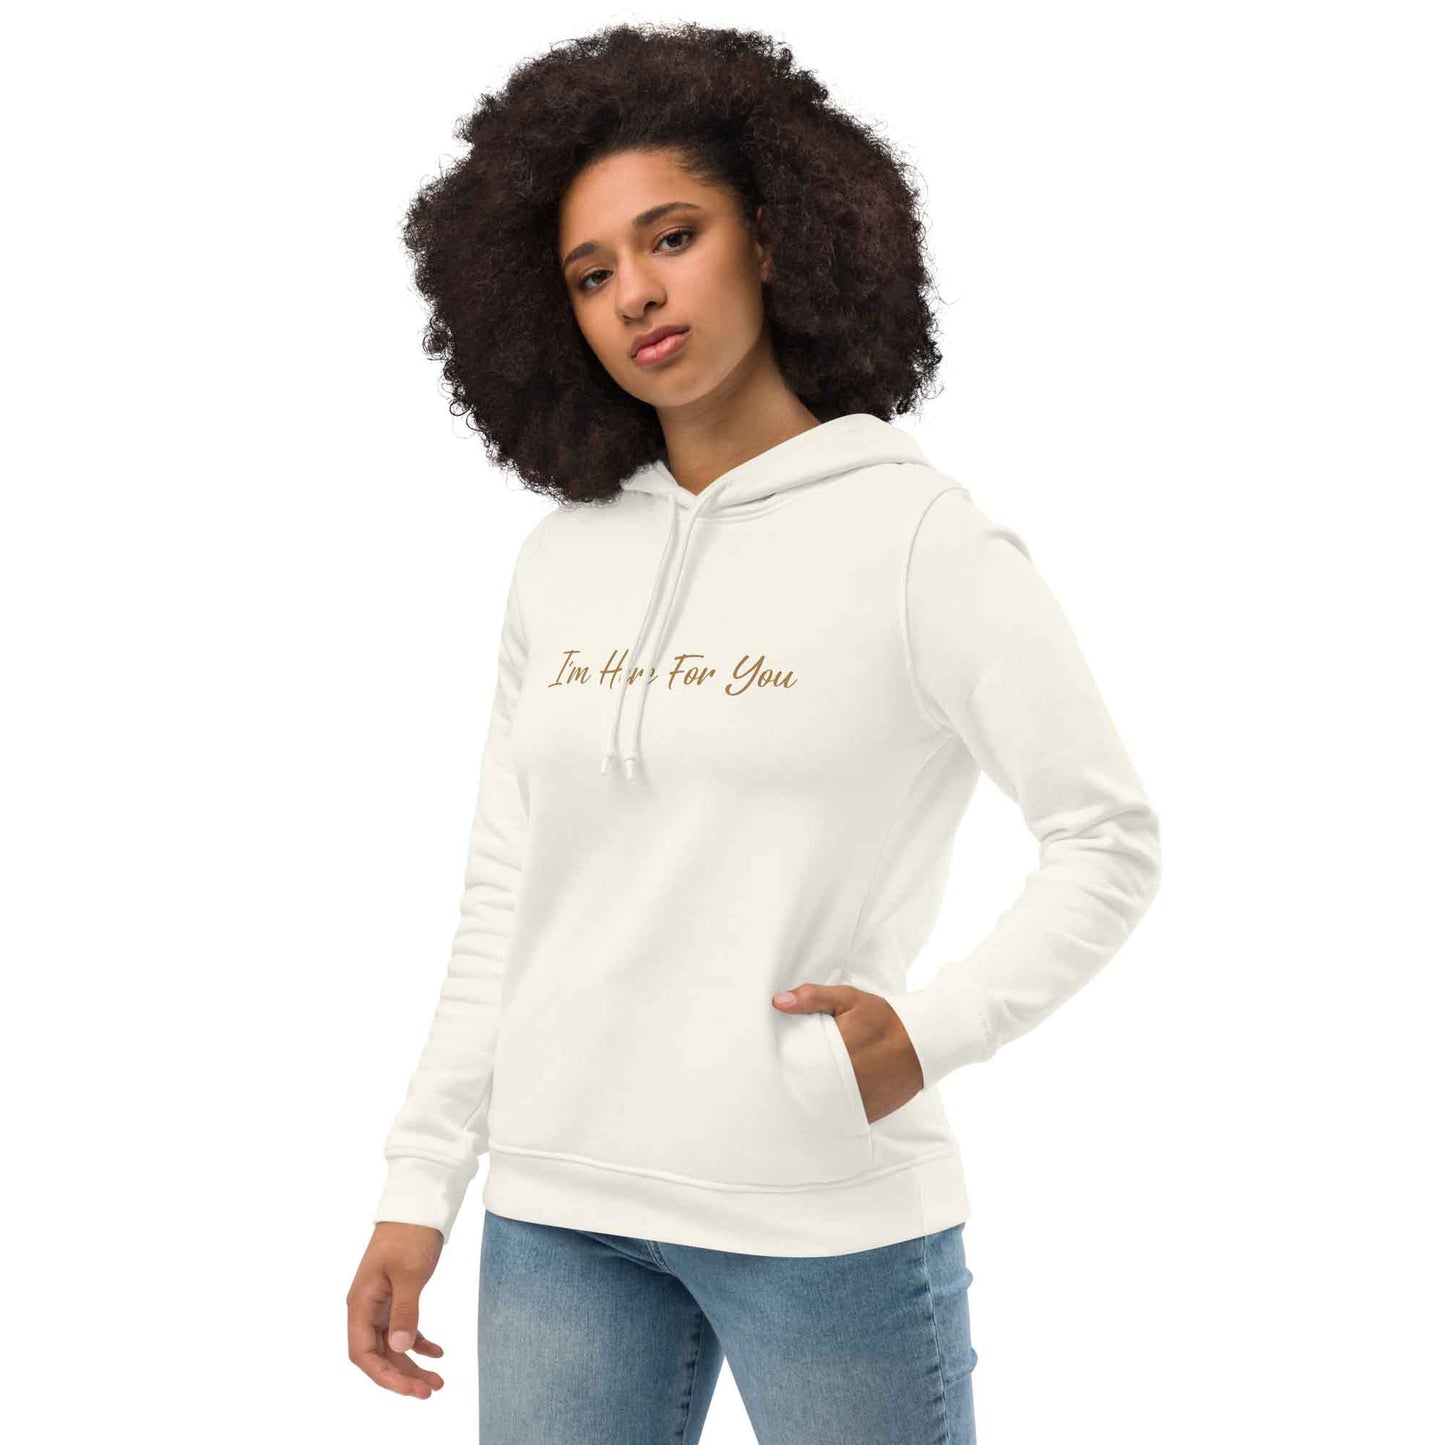 Women off-white motivational hoodie with inspirational quote, "I'm Here For You."